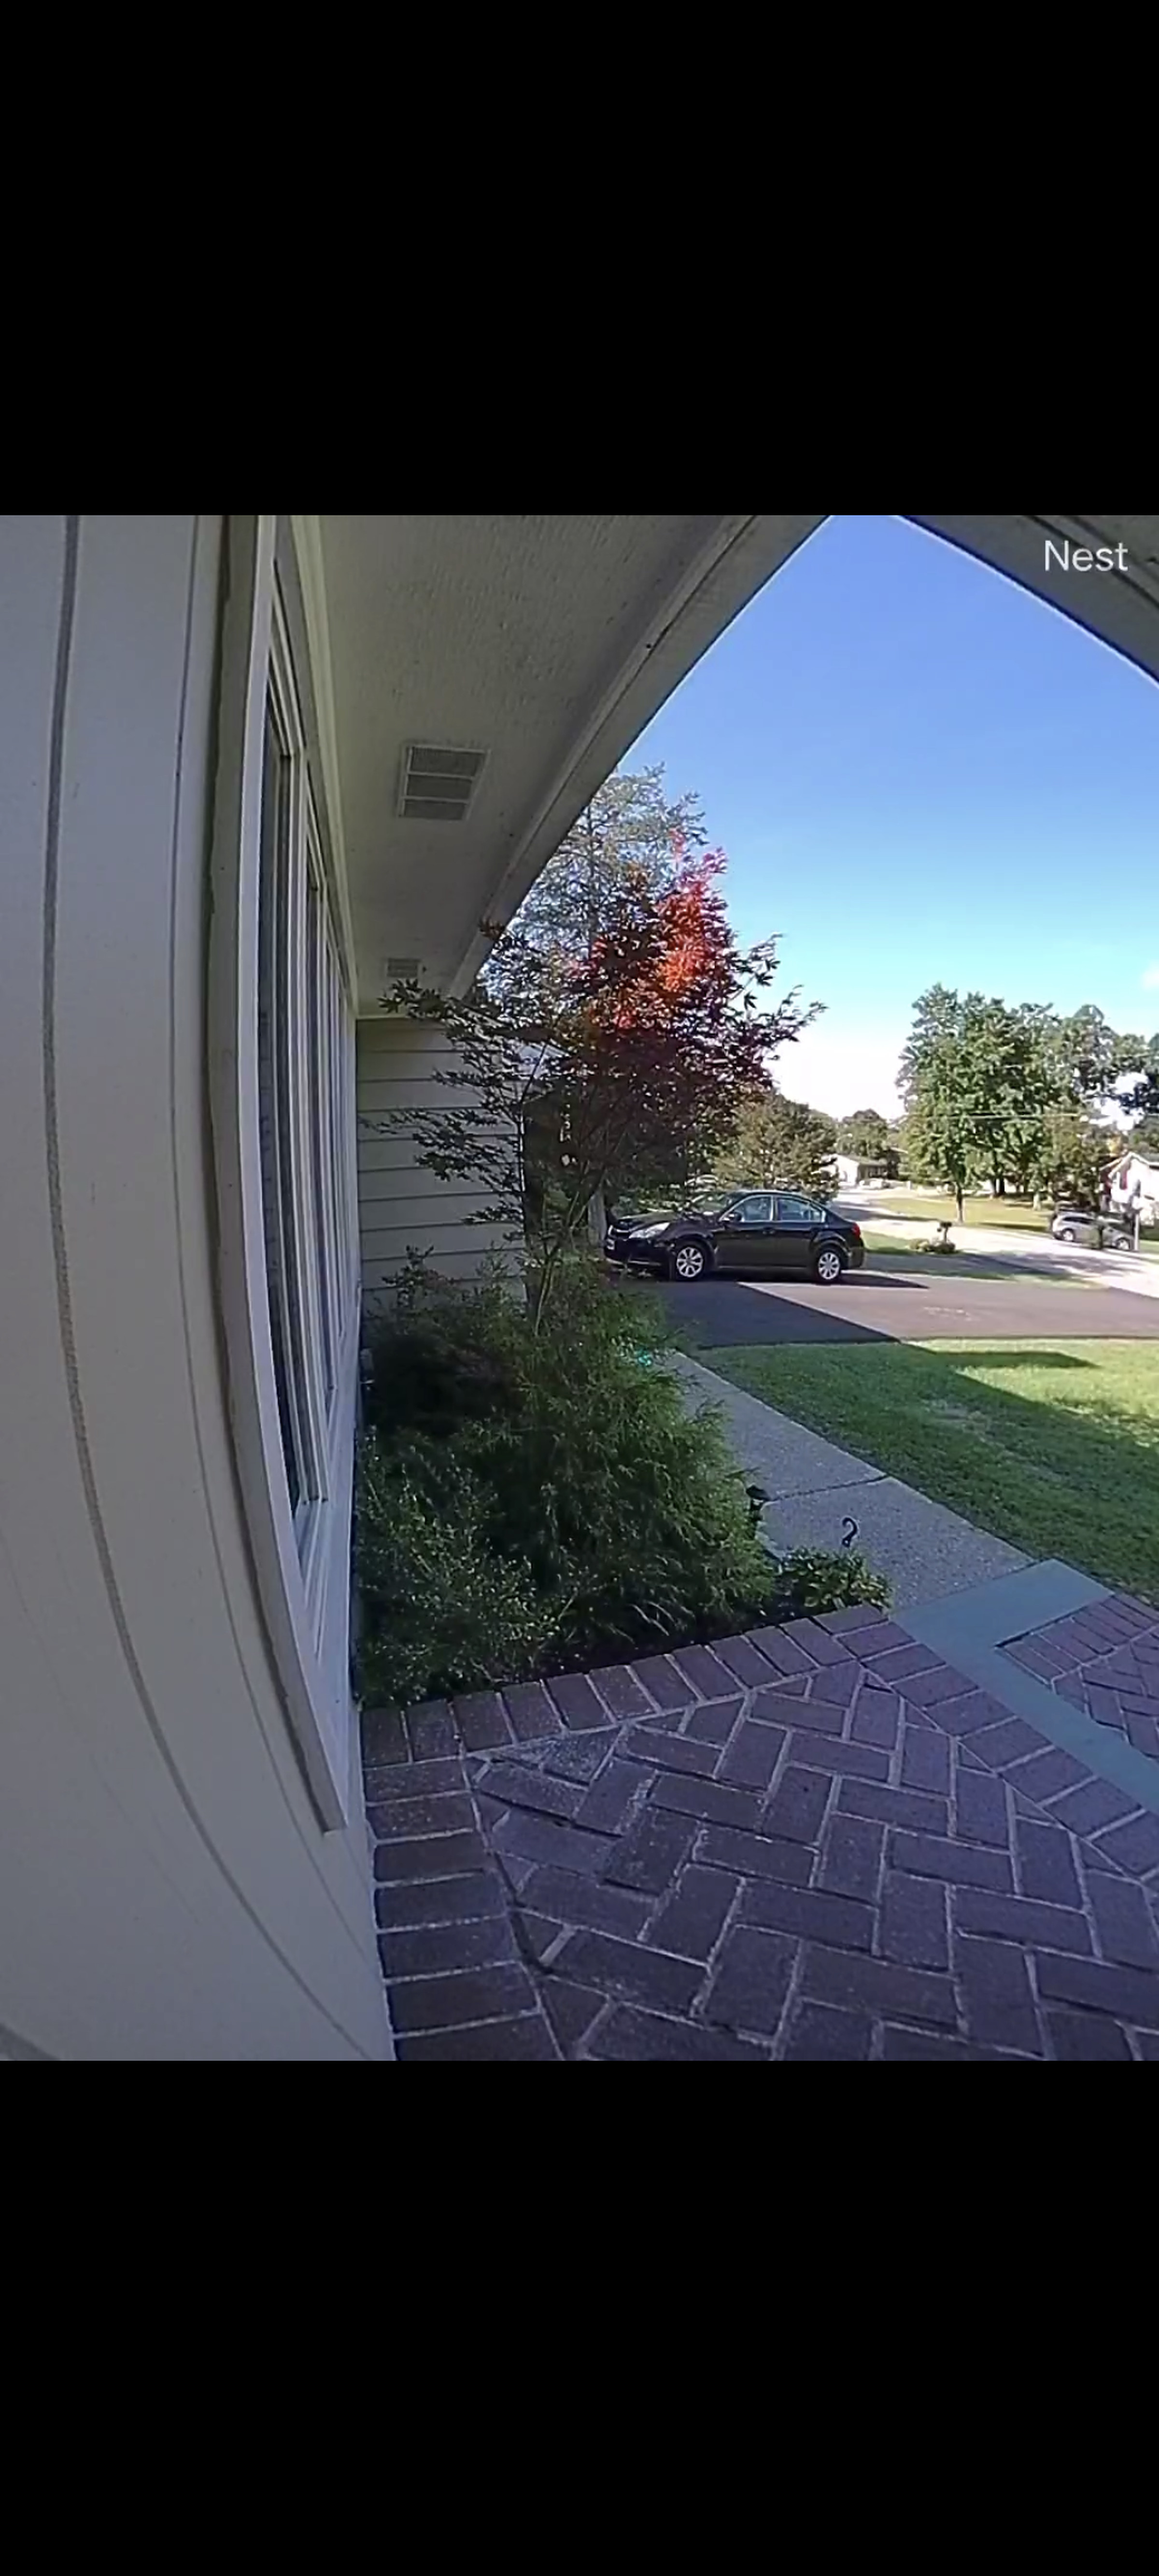 The Nest Doorbell’s 3:4 aspect ratio isn’t quite wide enough to capture my whole porch, but it does show head-to-toe views.